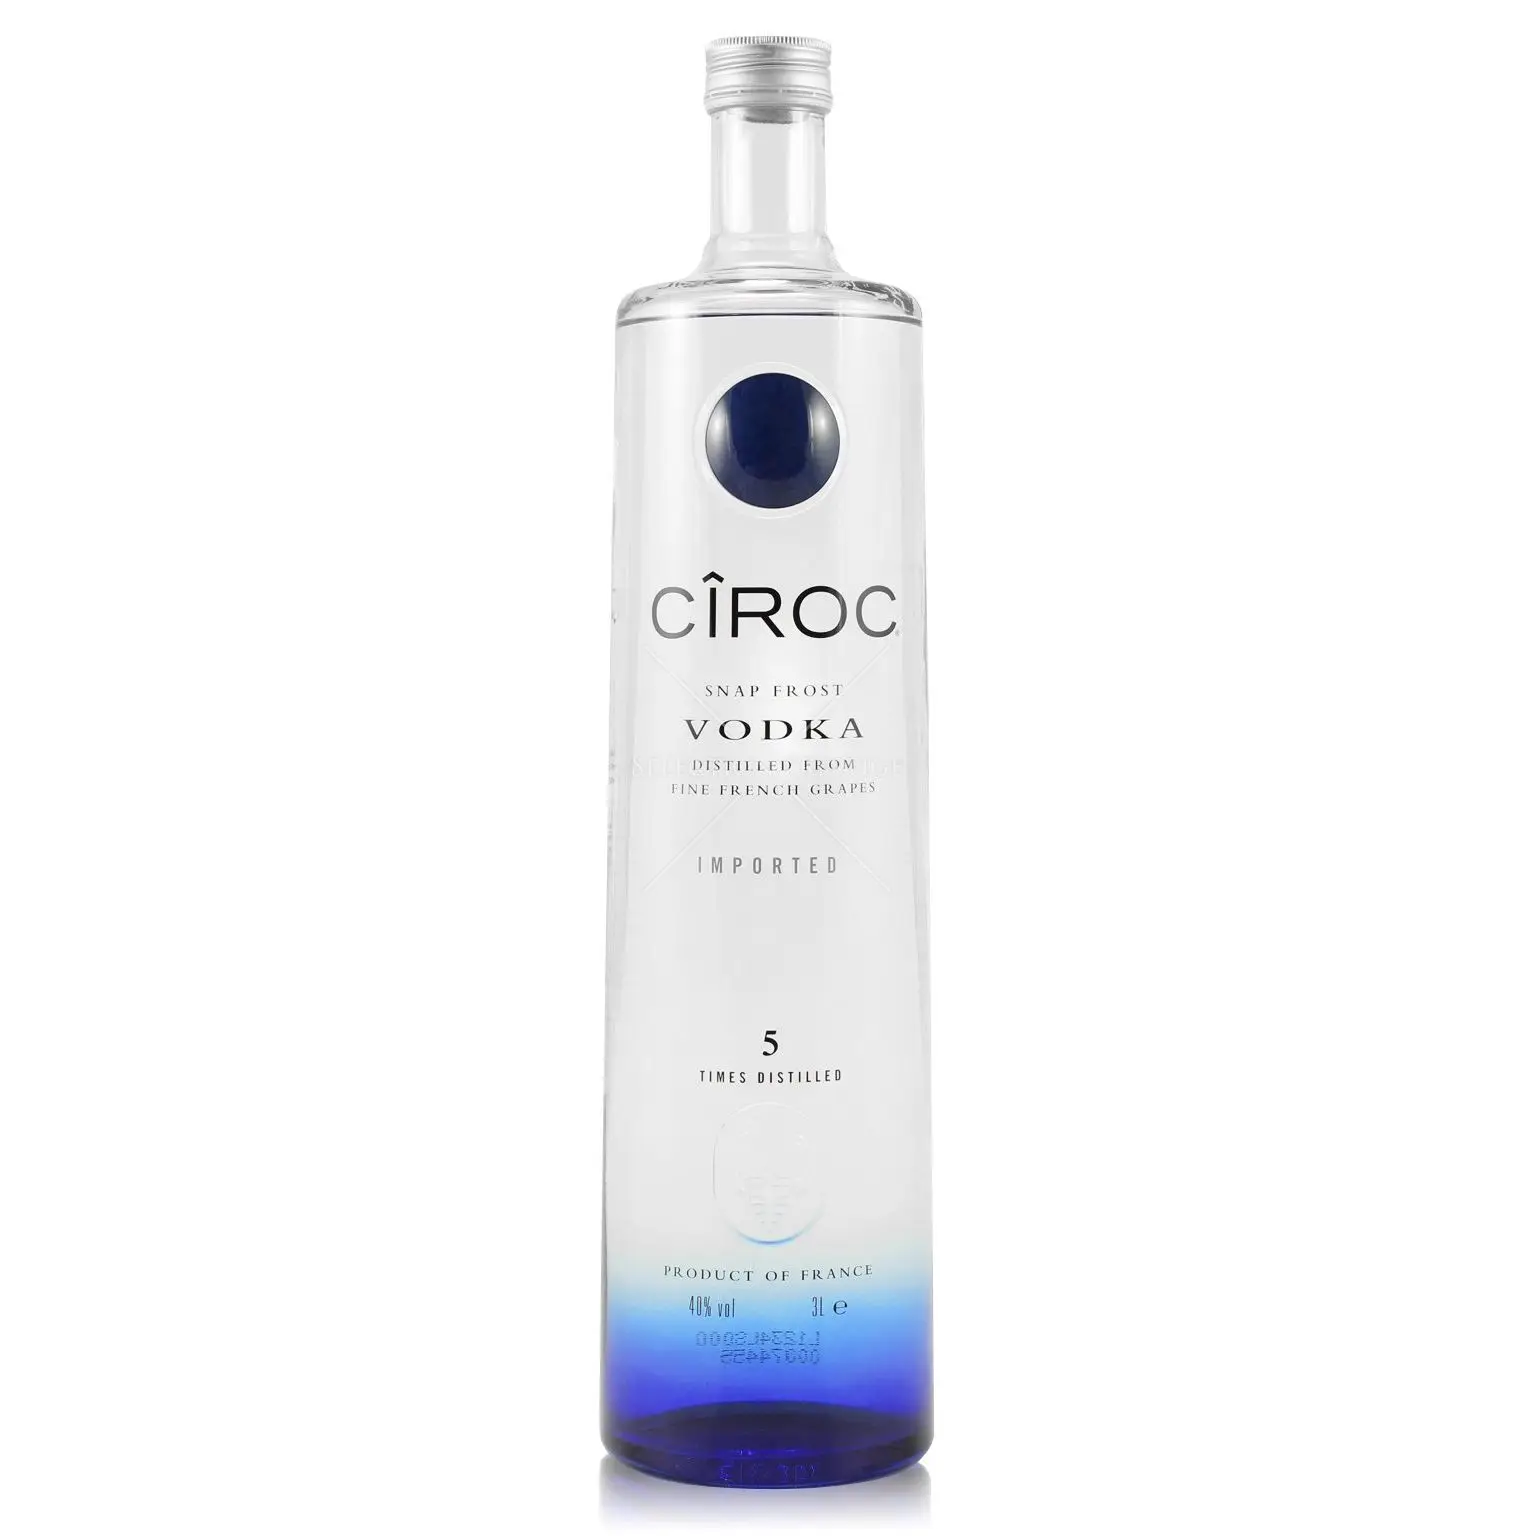 2021  Wholesale CIROC Vodka, 375ml,750 mL, Made with Vodka Infused with Natural Flavors